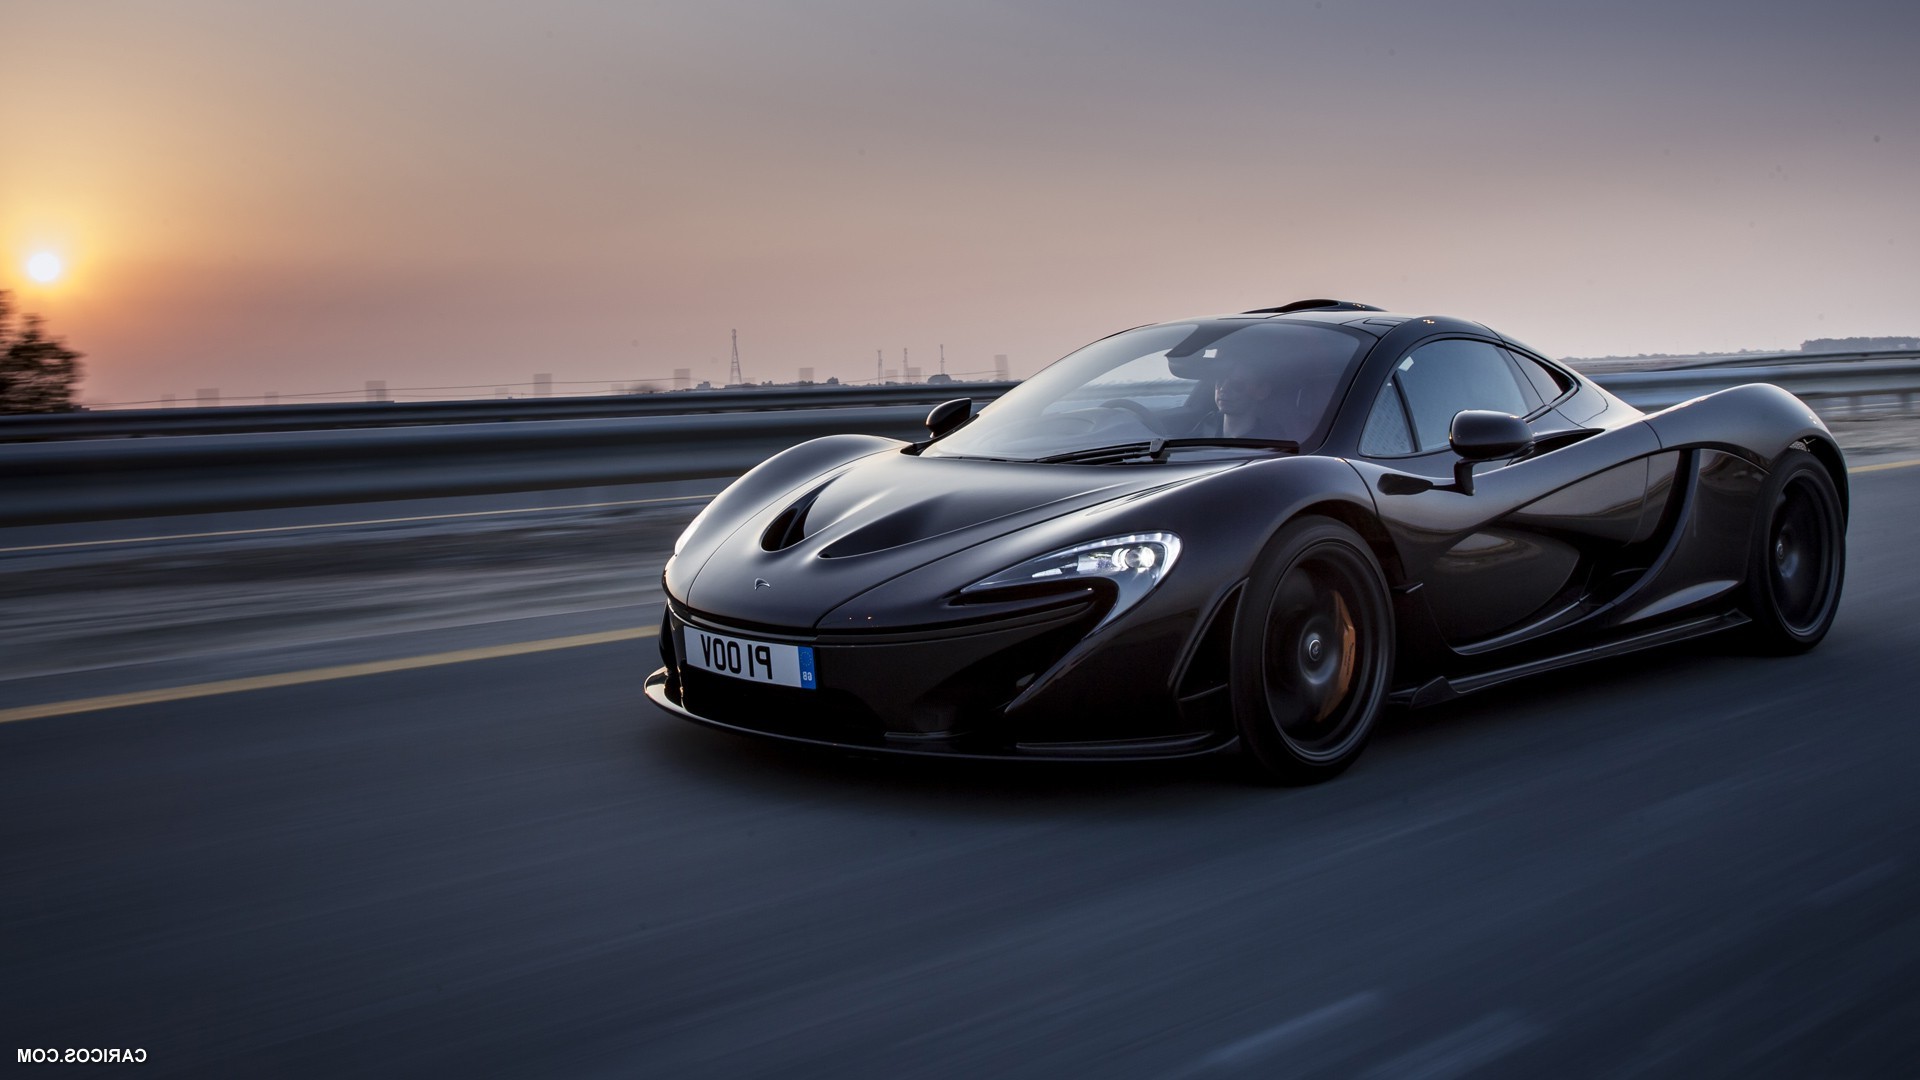 2560x1700 Mclaren P1 Supercar Chromebook Pixel Hd 4k Wallpapers Images Backgrounds Photos And Pictures